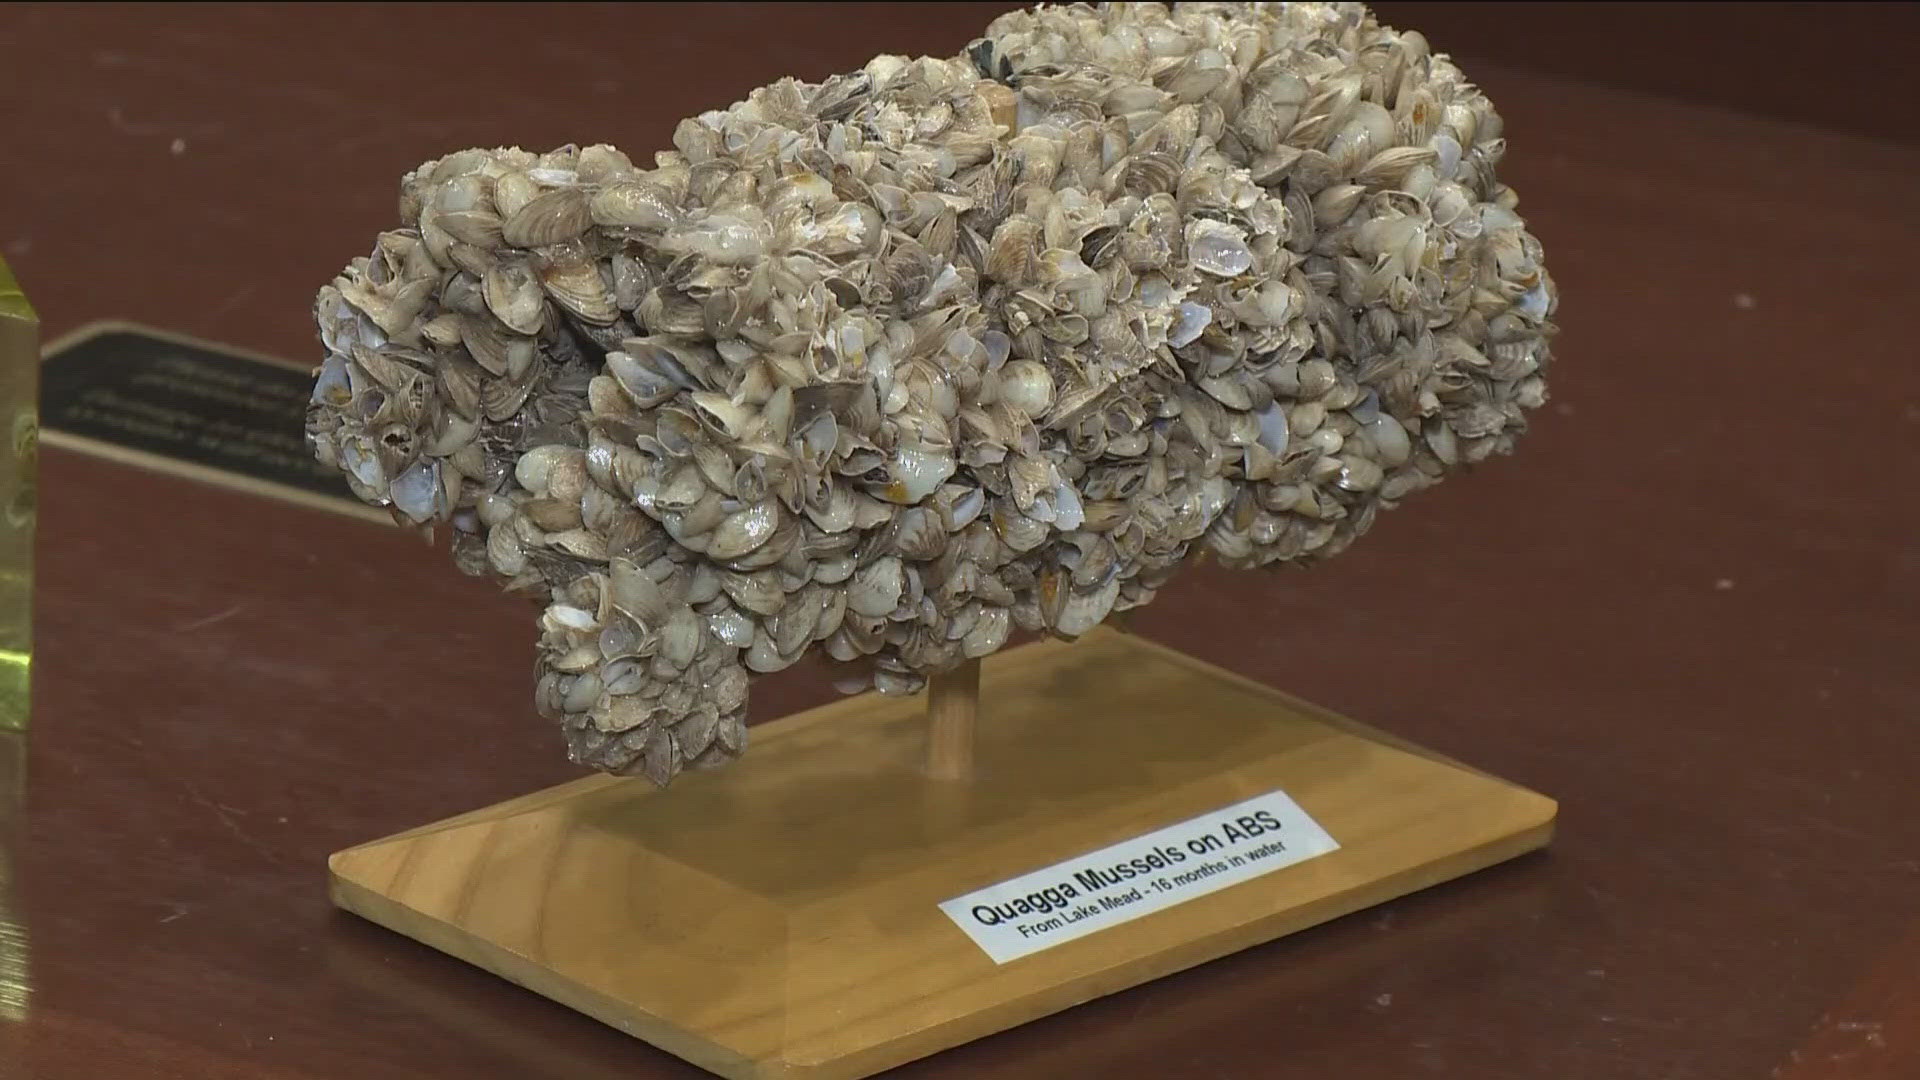 The bill is meant to help the state prevent invasive species like quagga mussels from entering Idaho's waterways.